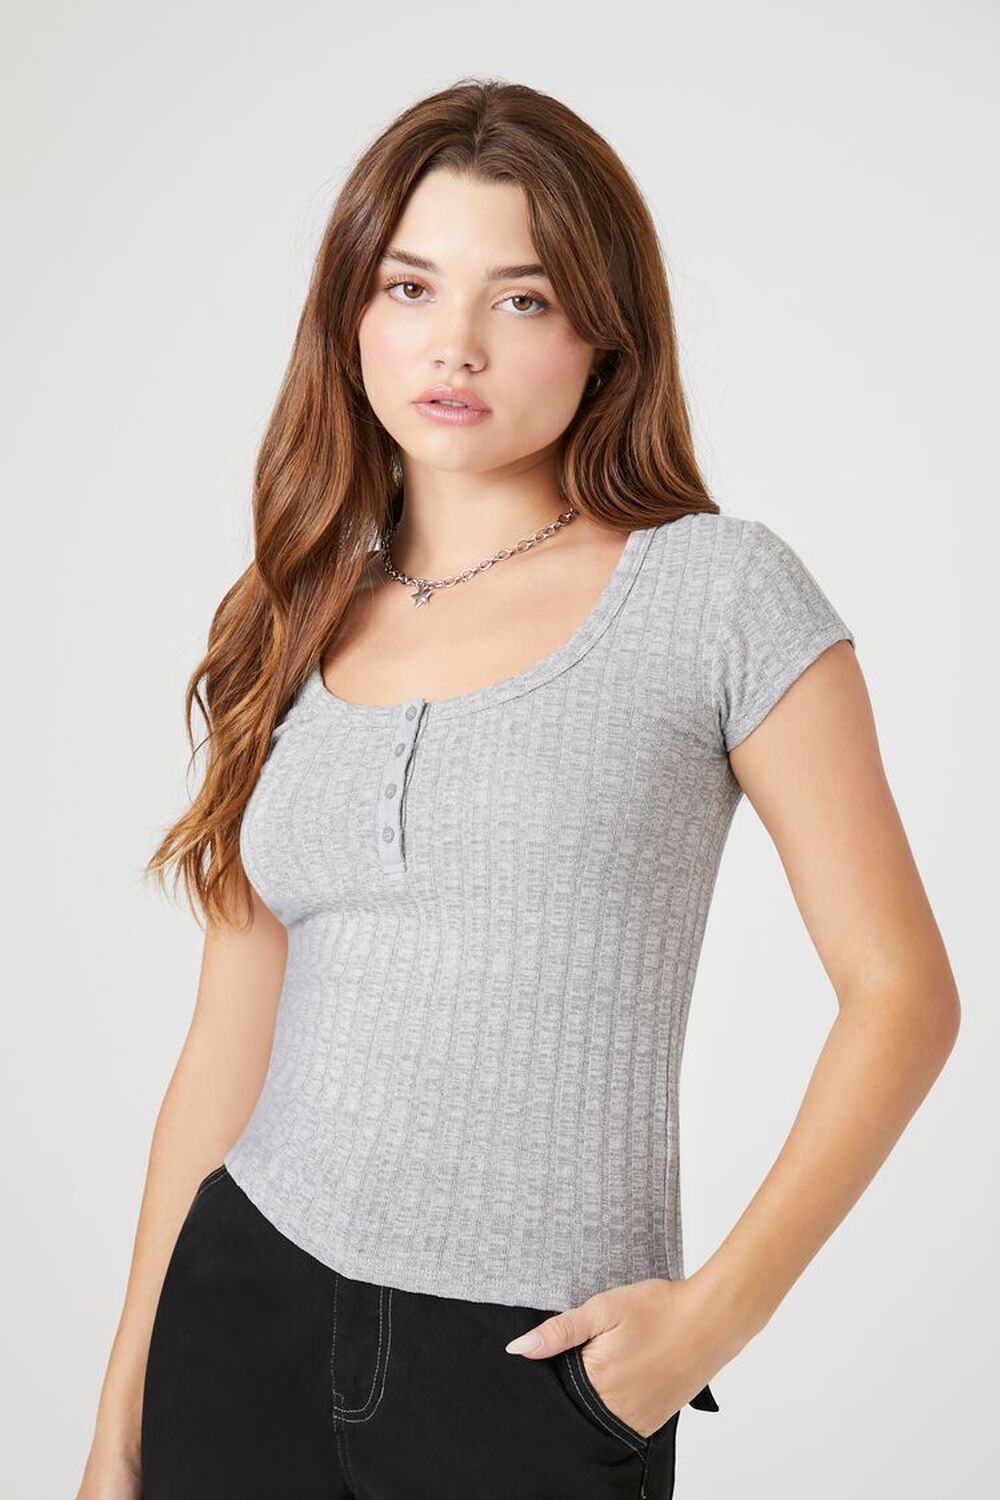 HEATHER GREY Rib-Knit Buttoned Baby Tee, image 1